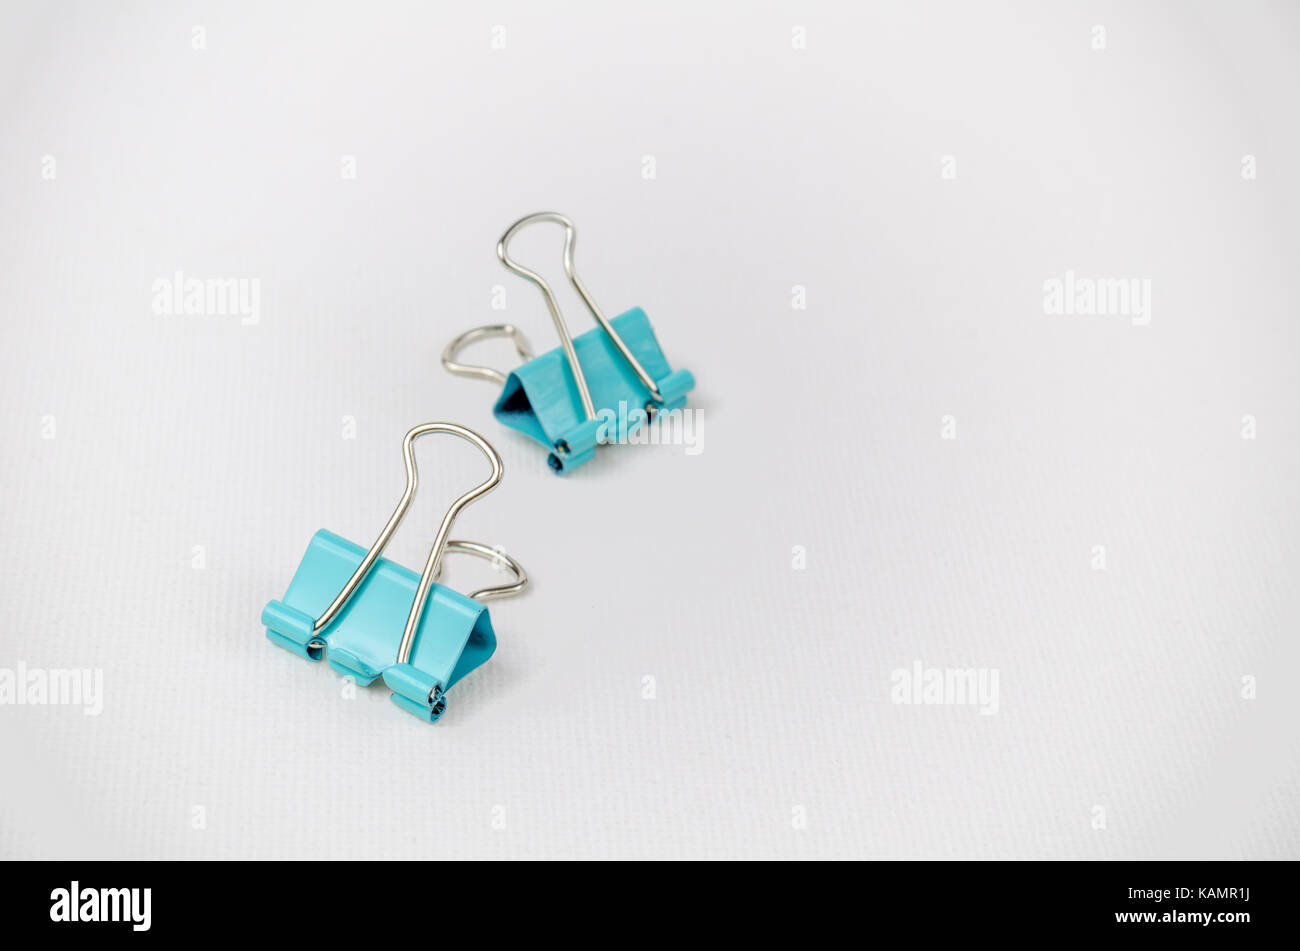 A Studio Photograph of a Pair of Turquoise Bulldog Clips Stock Photo